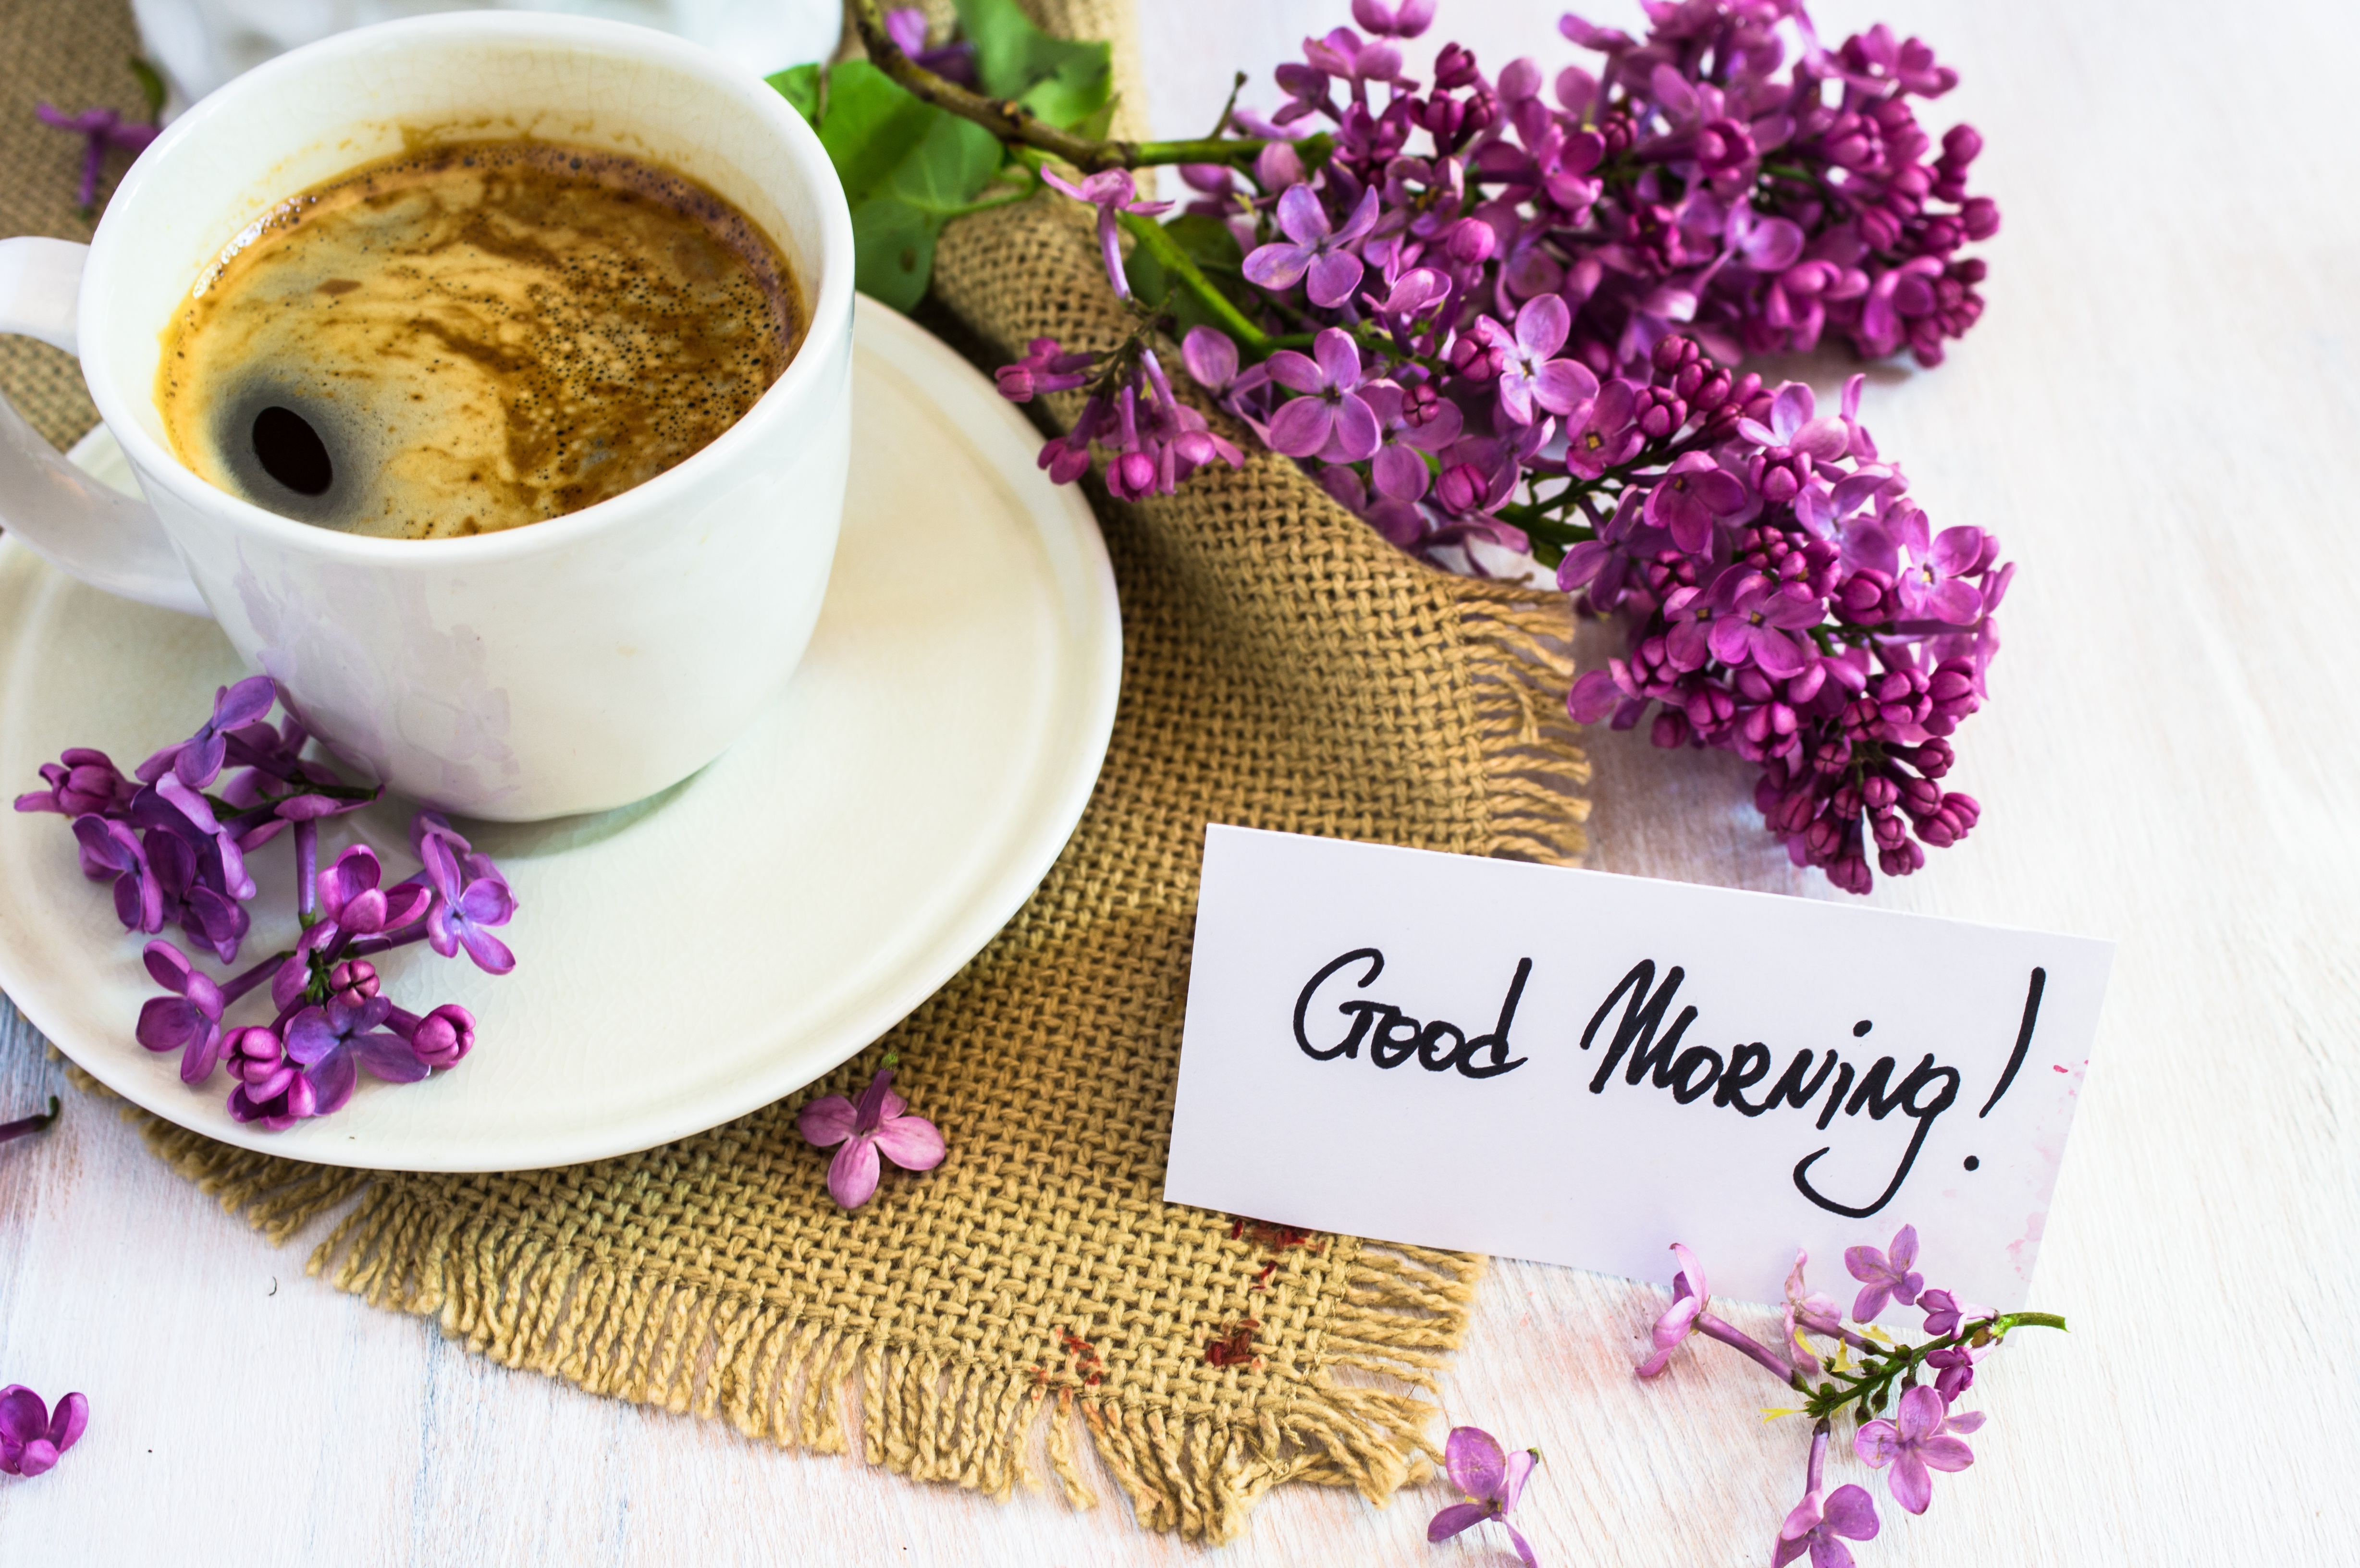 Good Morning 4K Hd Images Wallpapers